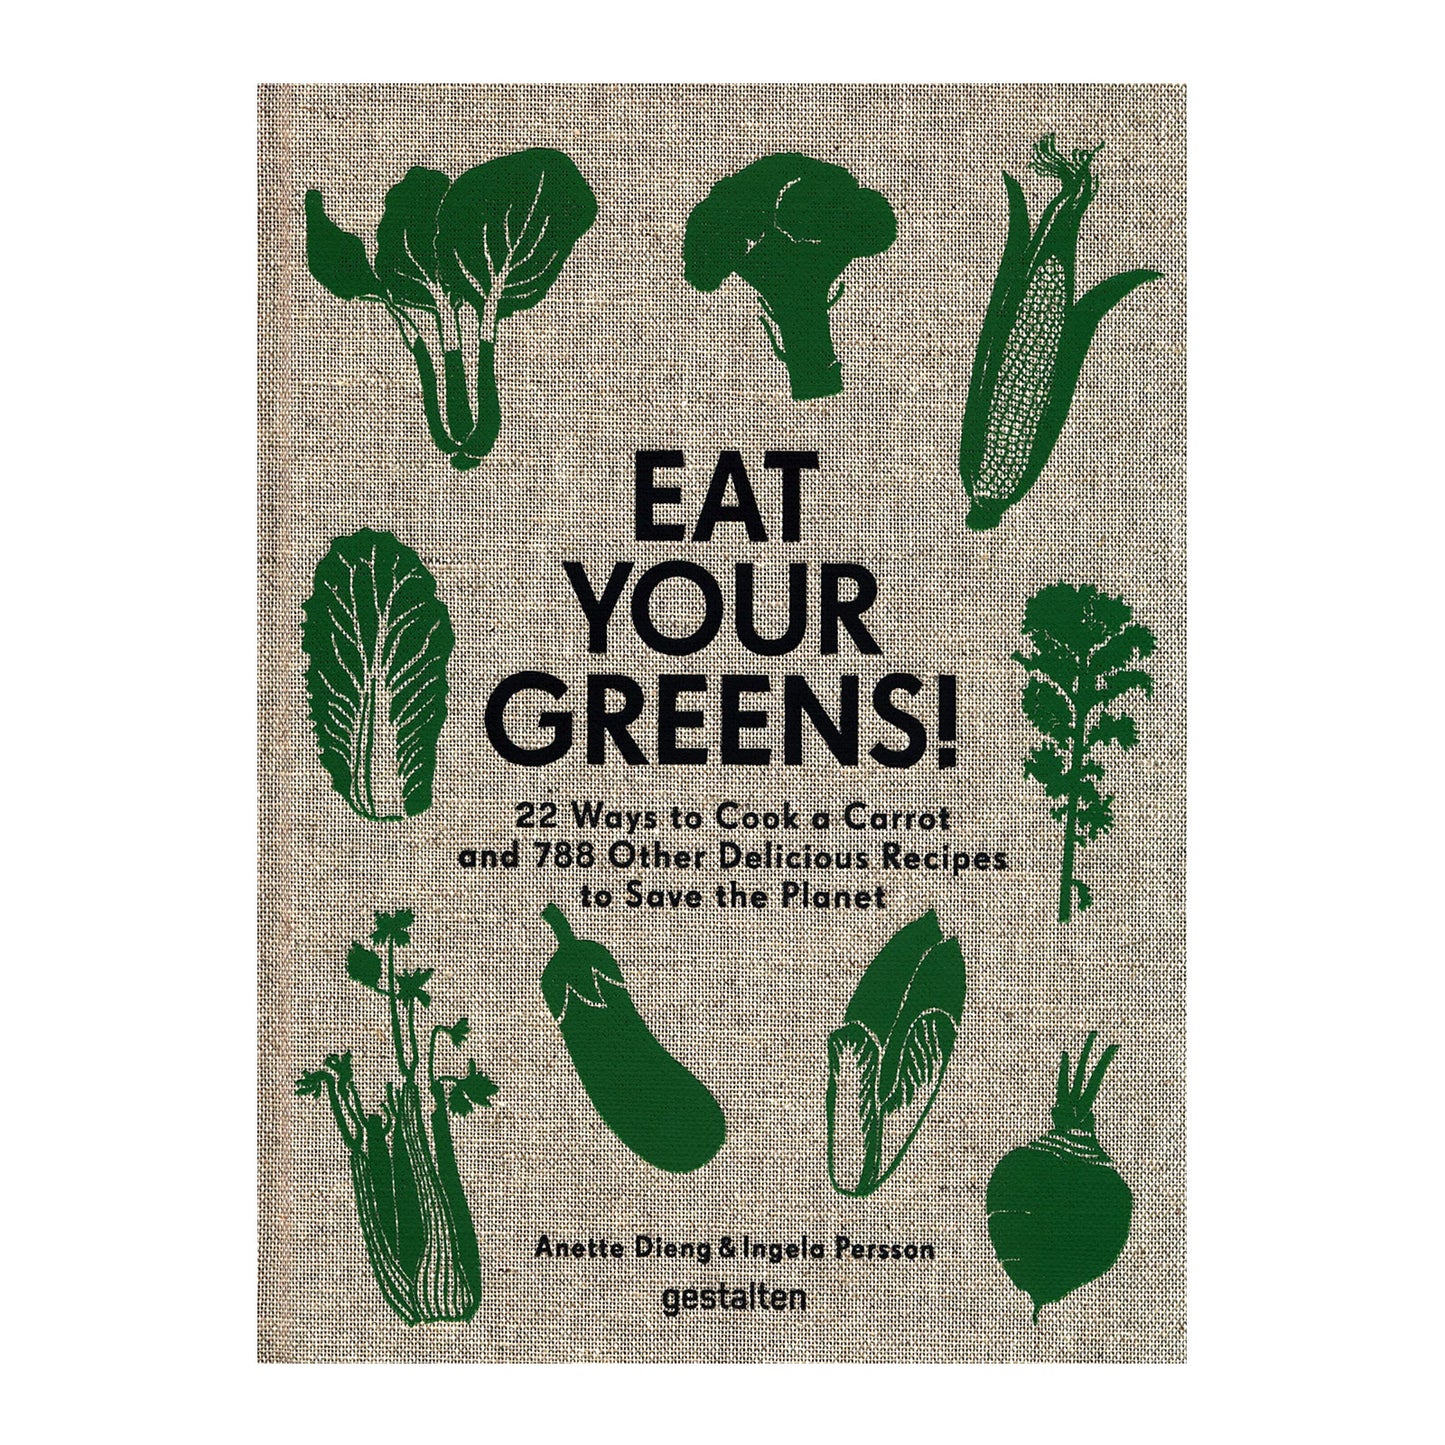 Eat Your Greens!